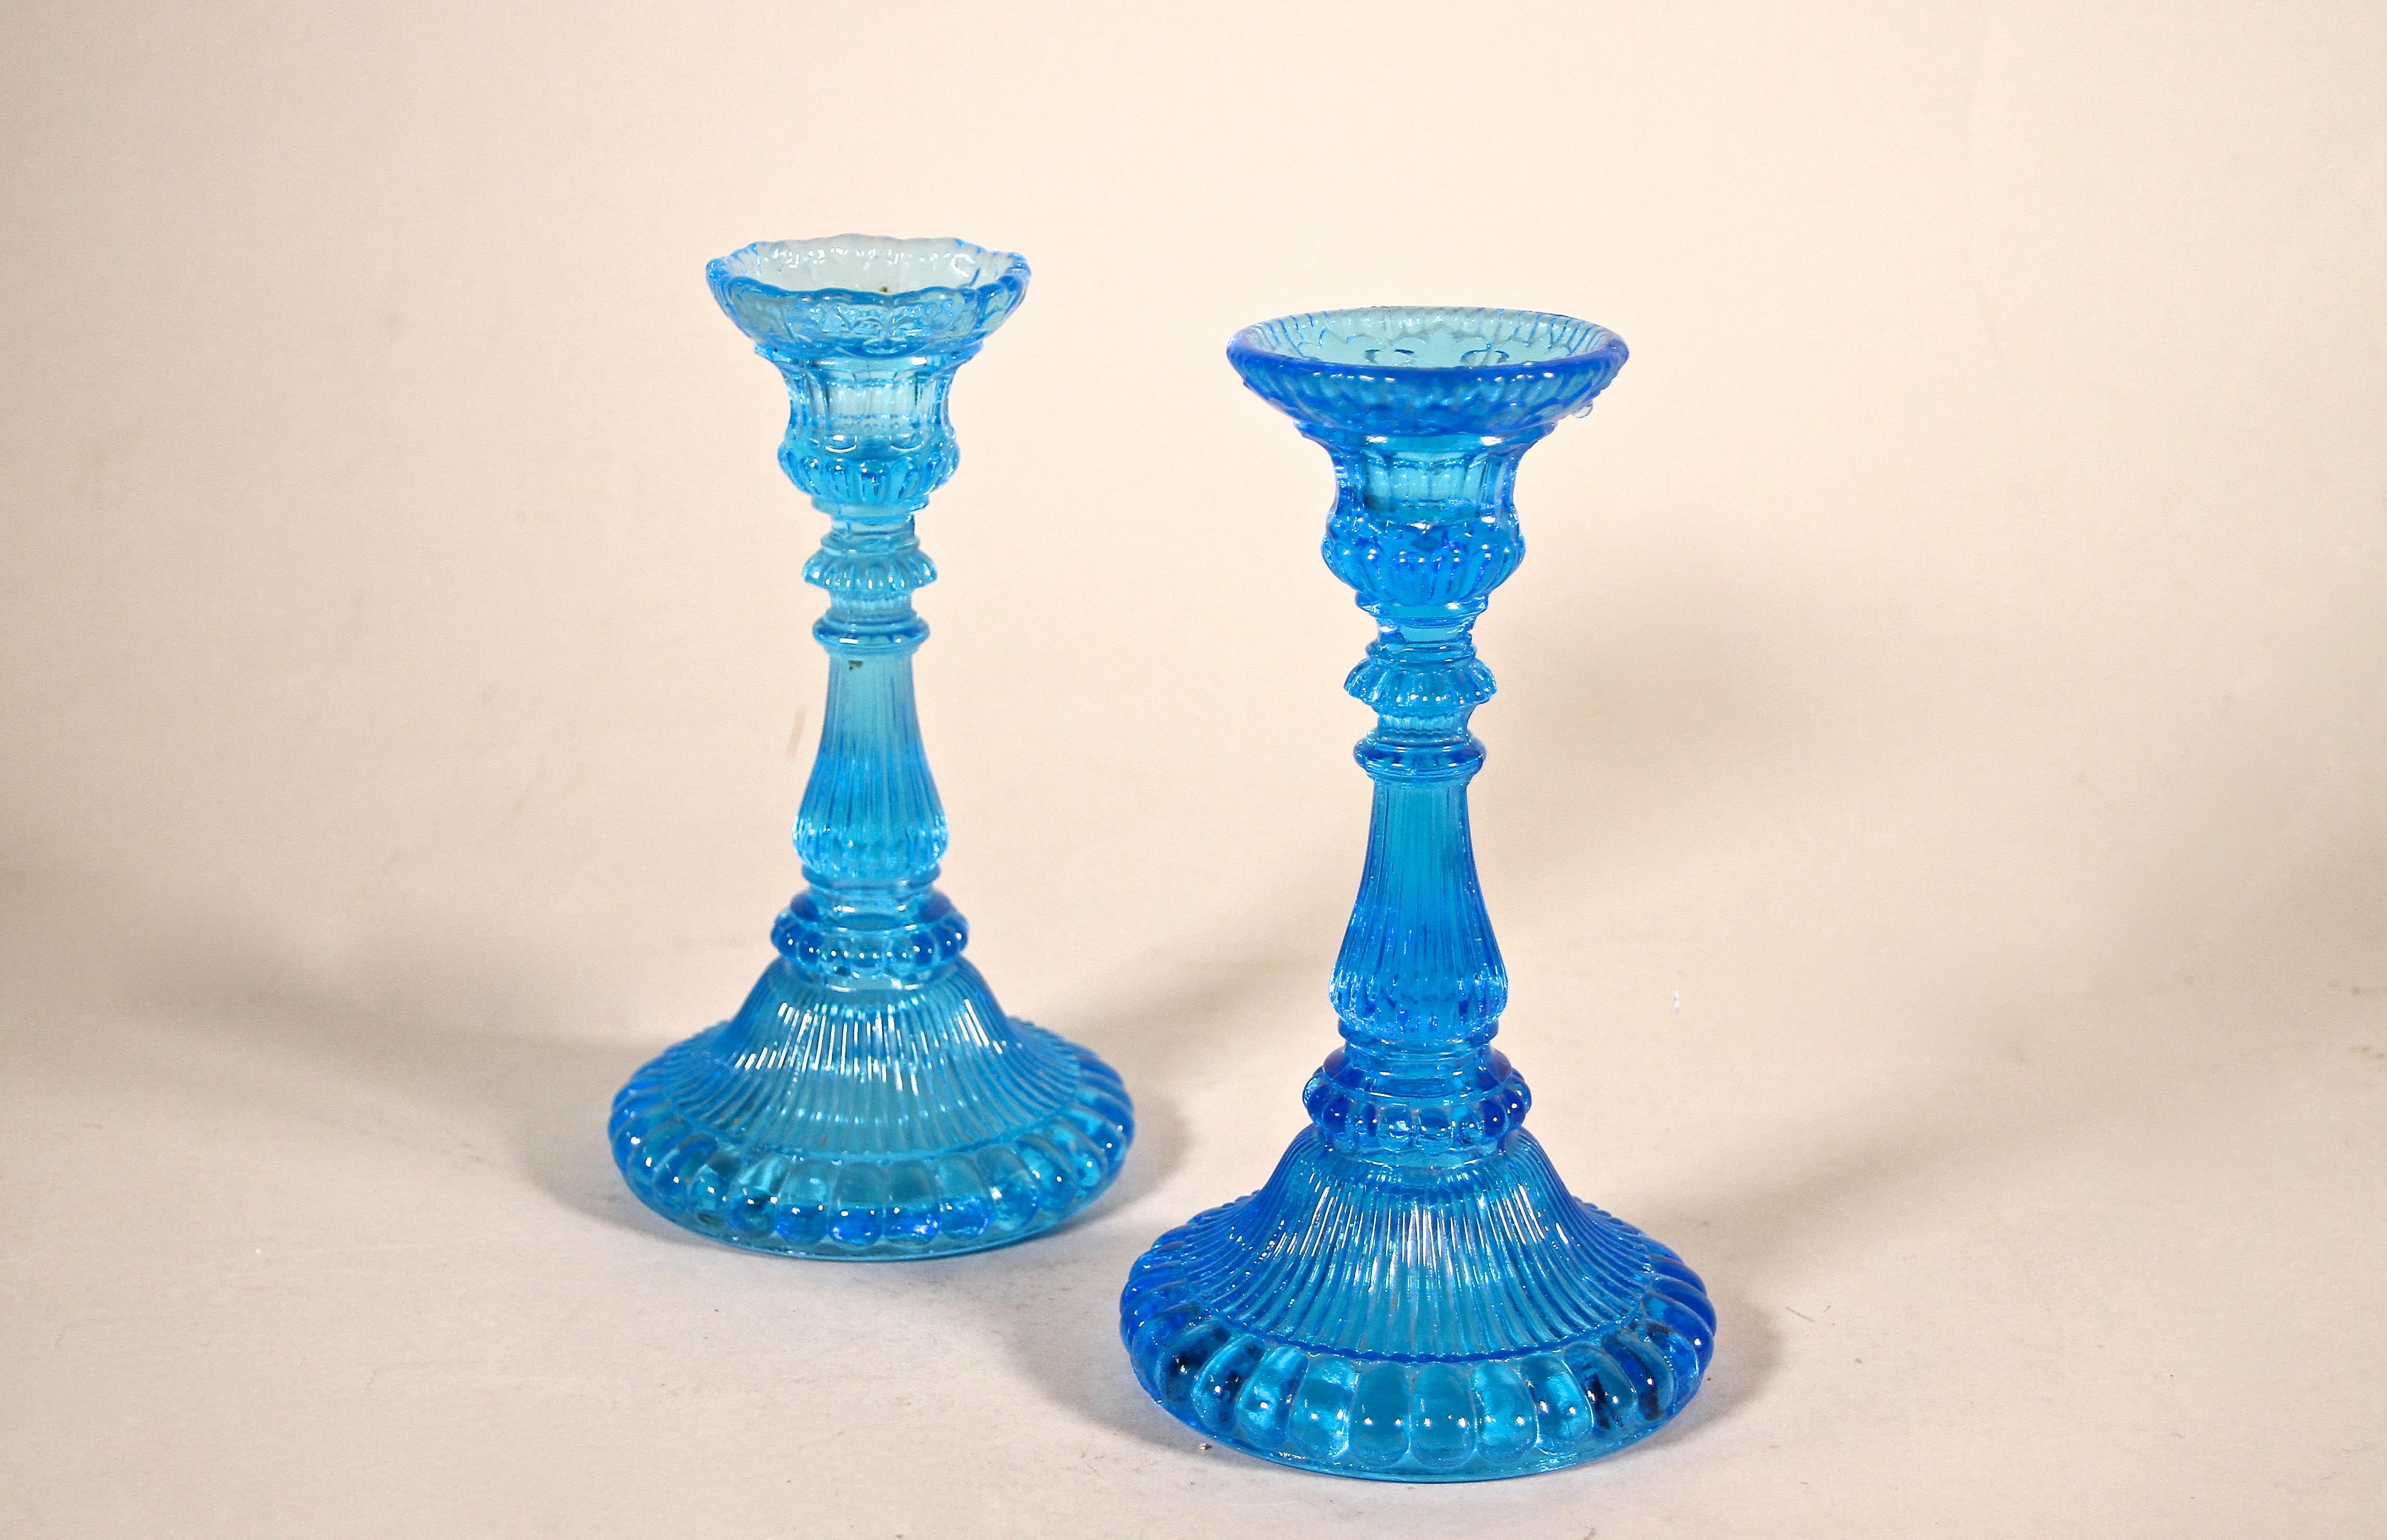 Lovely Blue Glass Candle Holders from the Art Deco period around 1920 in Austria. Artfully made of pressed blue colored glass, these two candlesticks show a real nice design adorned by beautiful lines. Fantastic decoration items for a table or a